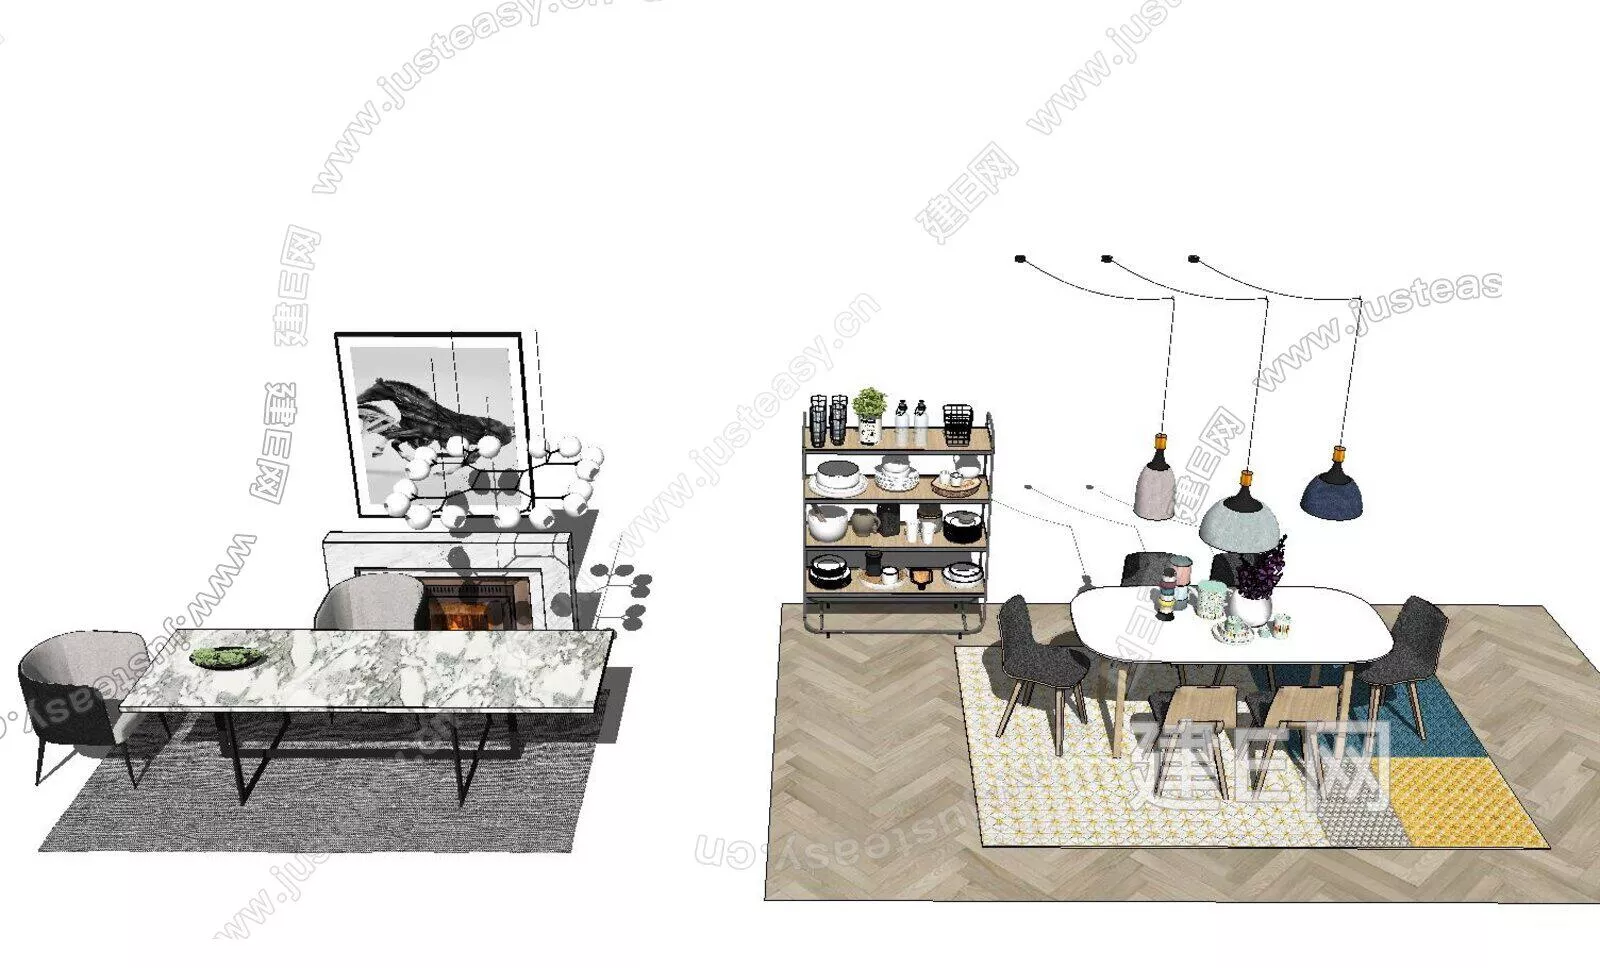 NORDIC DINING TABLE SET - SKETCHUP 3D MODEL - ENSCAPE - ID17326